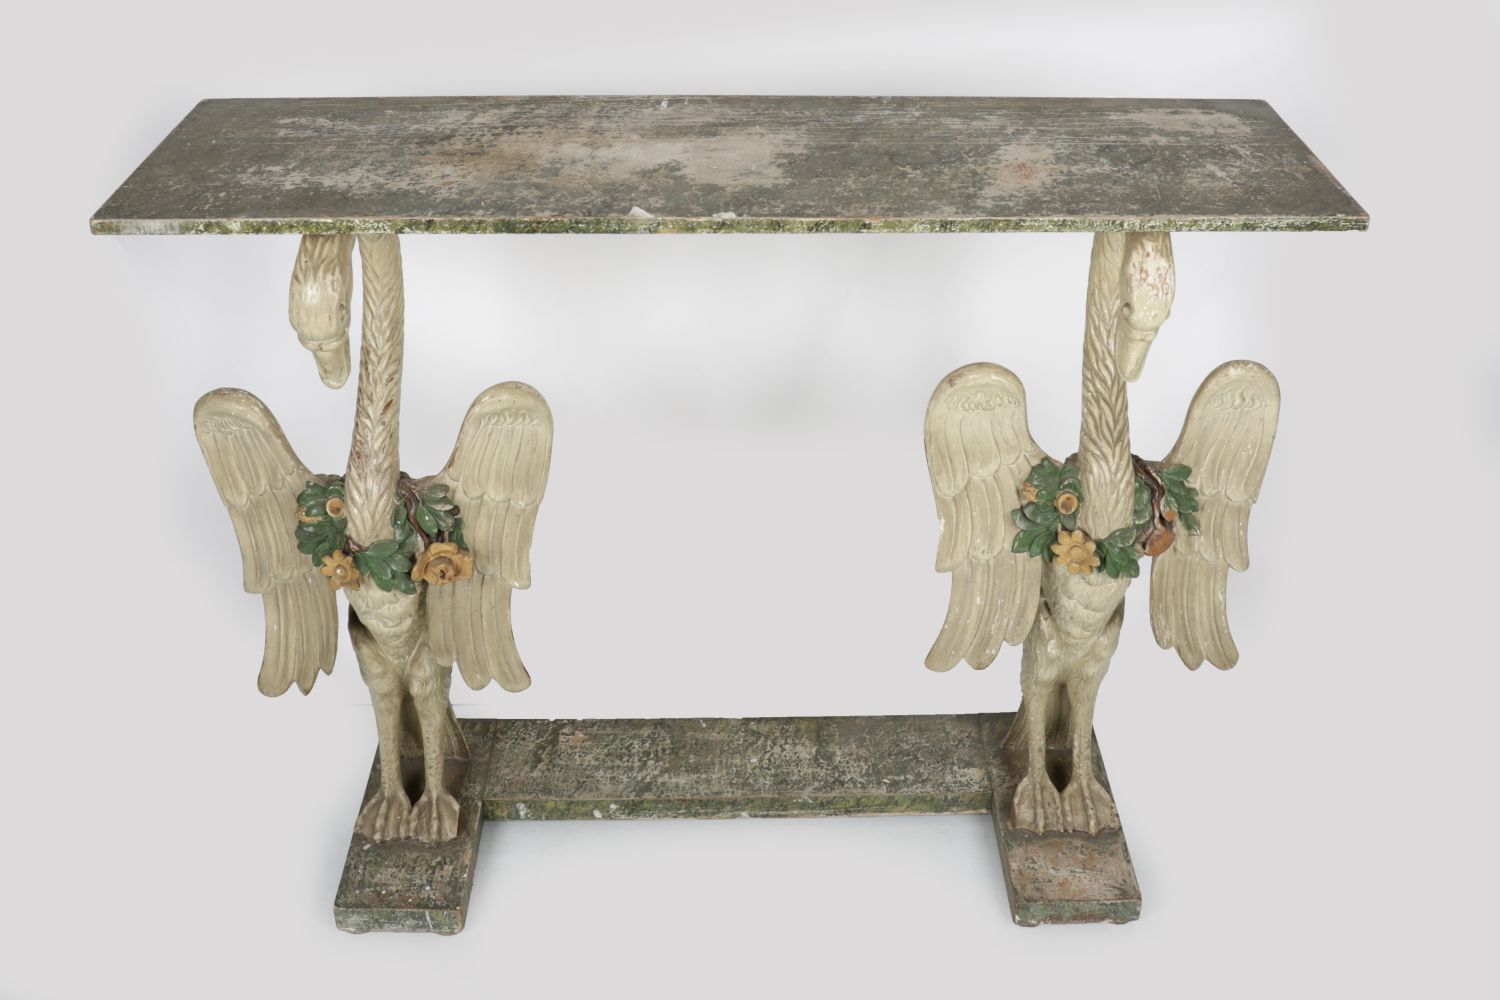 19TH-CENTURY PAINTED FIGURAL CONSOLE TABLE - Image 4 of 4